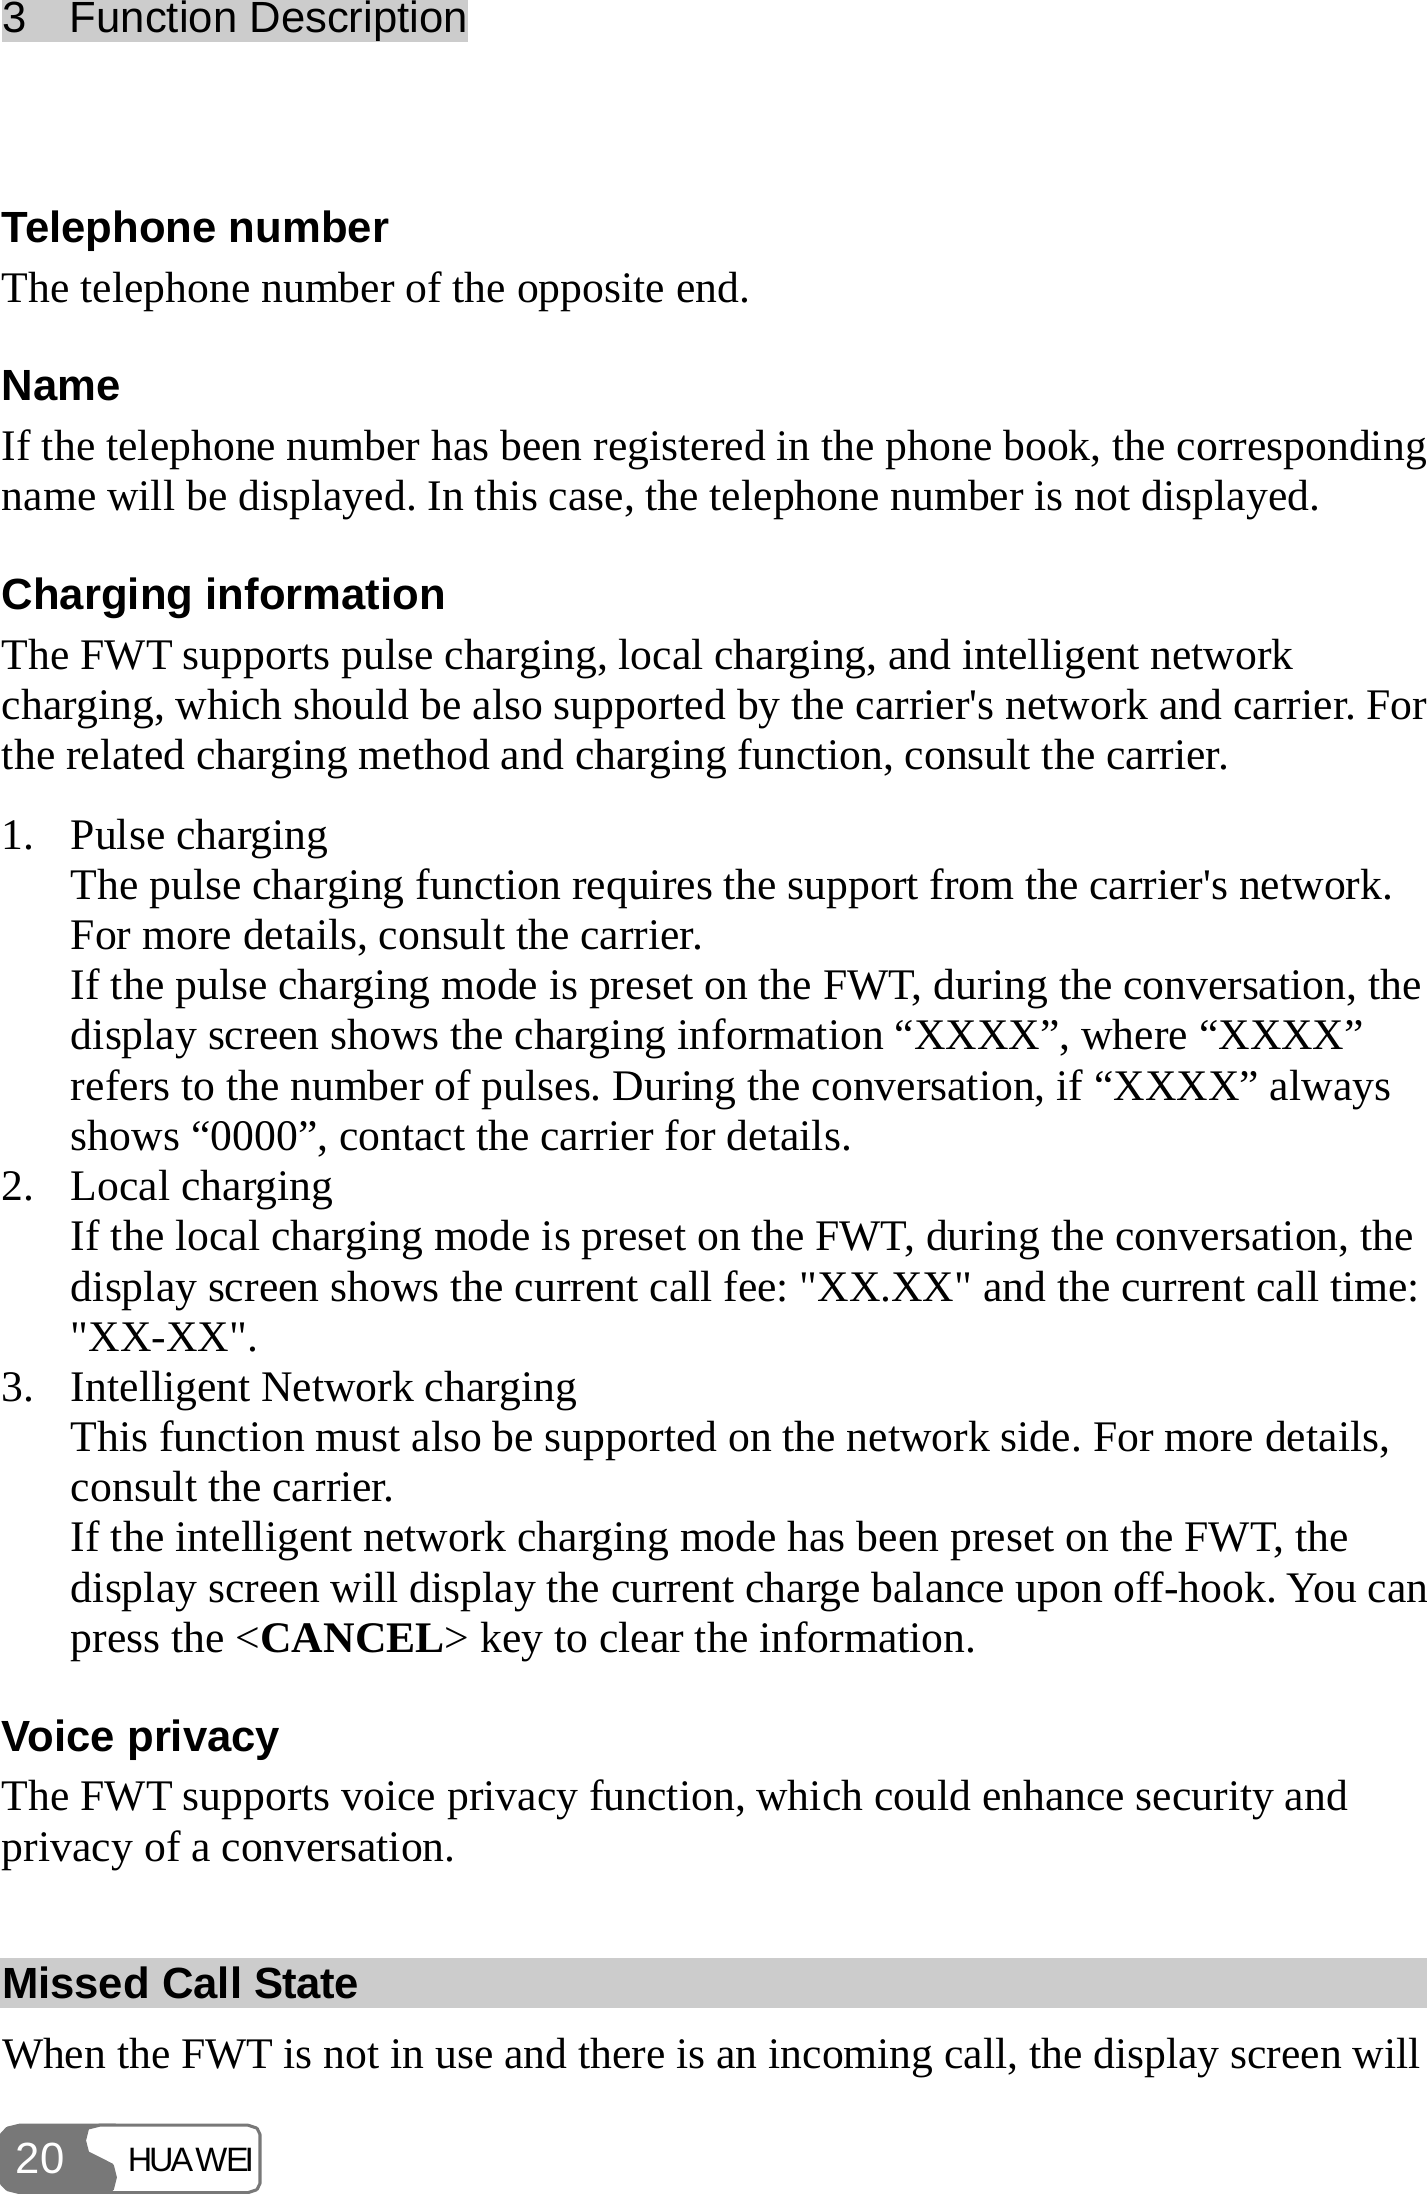 3  Function Description HUAWEI 20  Telephone number The telephone number of the opposite end. Name If the telephone number has been registered in the phone book, the corresponding name will be displayed. In this case, the telephone number is not displayed. Charging information The FWT supports pulse charging, local charging, and intelligent network charging, which should be also supported by the carrier&apos;s network and carrier. For the related charging method and charging function, consult the carrier. 1. Pulse charging The pulse charging function requires the support from the carrier&apos;s network. For more details, consult the carrier. If the pulse charging mode is preset on the FWT, during the conversation, the display screen shows the charging information “XXXX”, where “XXXX” refers to the number of pulses. During the conversation, if “XXXX” always shows “0000”, contact the carrier for details. 2. Local charging If the local charging mode is preset on the FWT, during the conversation, the display screen shows the current call fee: &quot;XX.XX&quot; and the current call time: &quot;XX-XX&quot;. 3. Intelligent Network charging This function must also be supported on the network side. For more details, consult the carrier. If the intelligent network charging mode has been preset on the FWT, the display screen will display the current charge balance upon off-hook. You can press the &lt;CANCEL&gt; key to clear the information. Voice privacy The FWT supports voice privacy function, which could enhance security and privacy of a conversation. Missed Call State When the FWT is not in use and there is an incoming call, the display screen will 